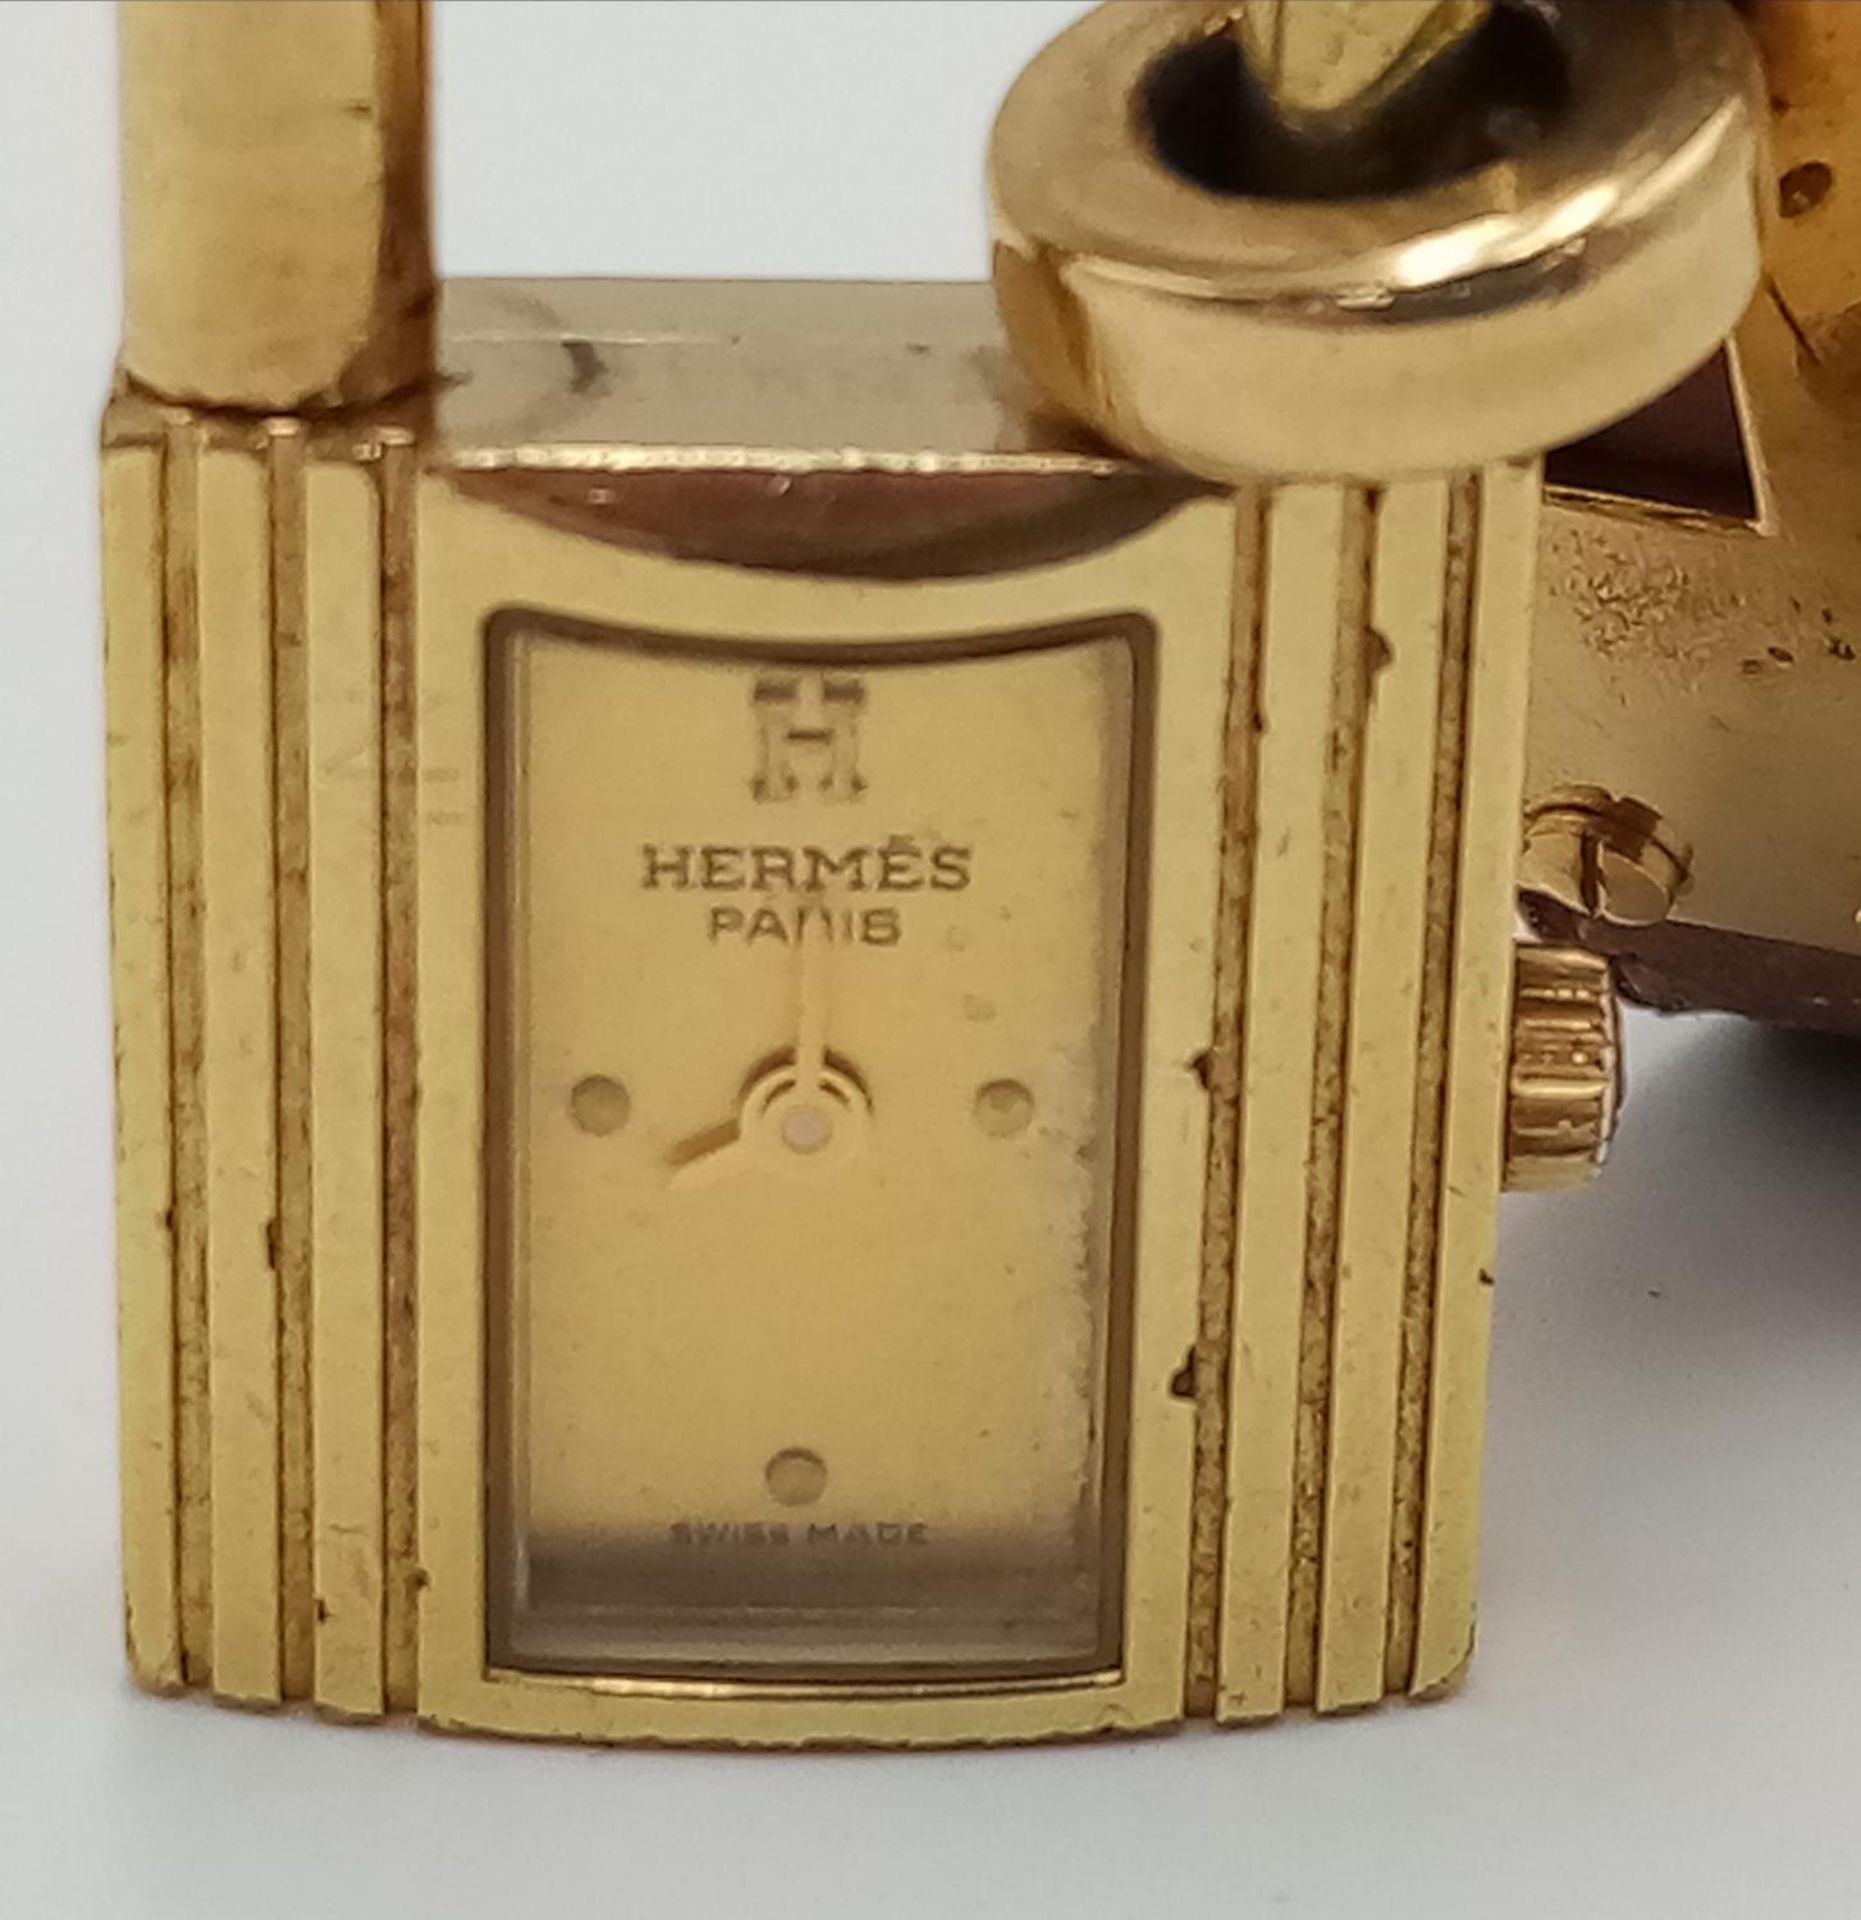 A Hermes Kelly Watch. Brown leather strap. Gold plated padlock quartz watch. Needs a battery so as - Image 3 of 7